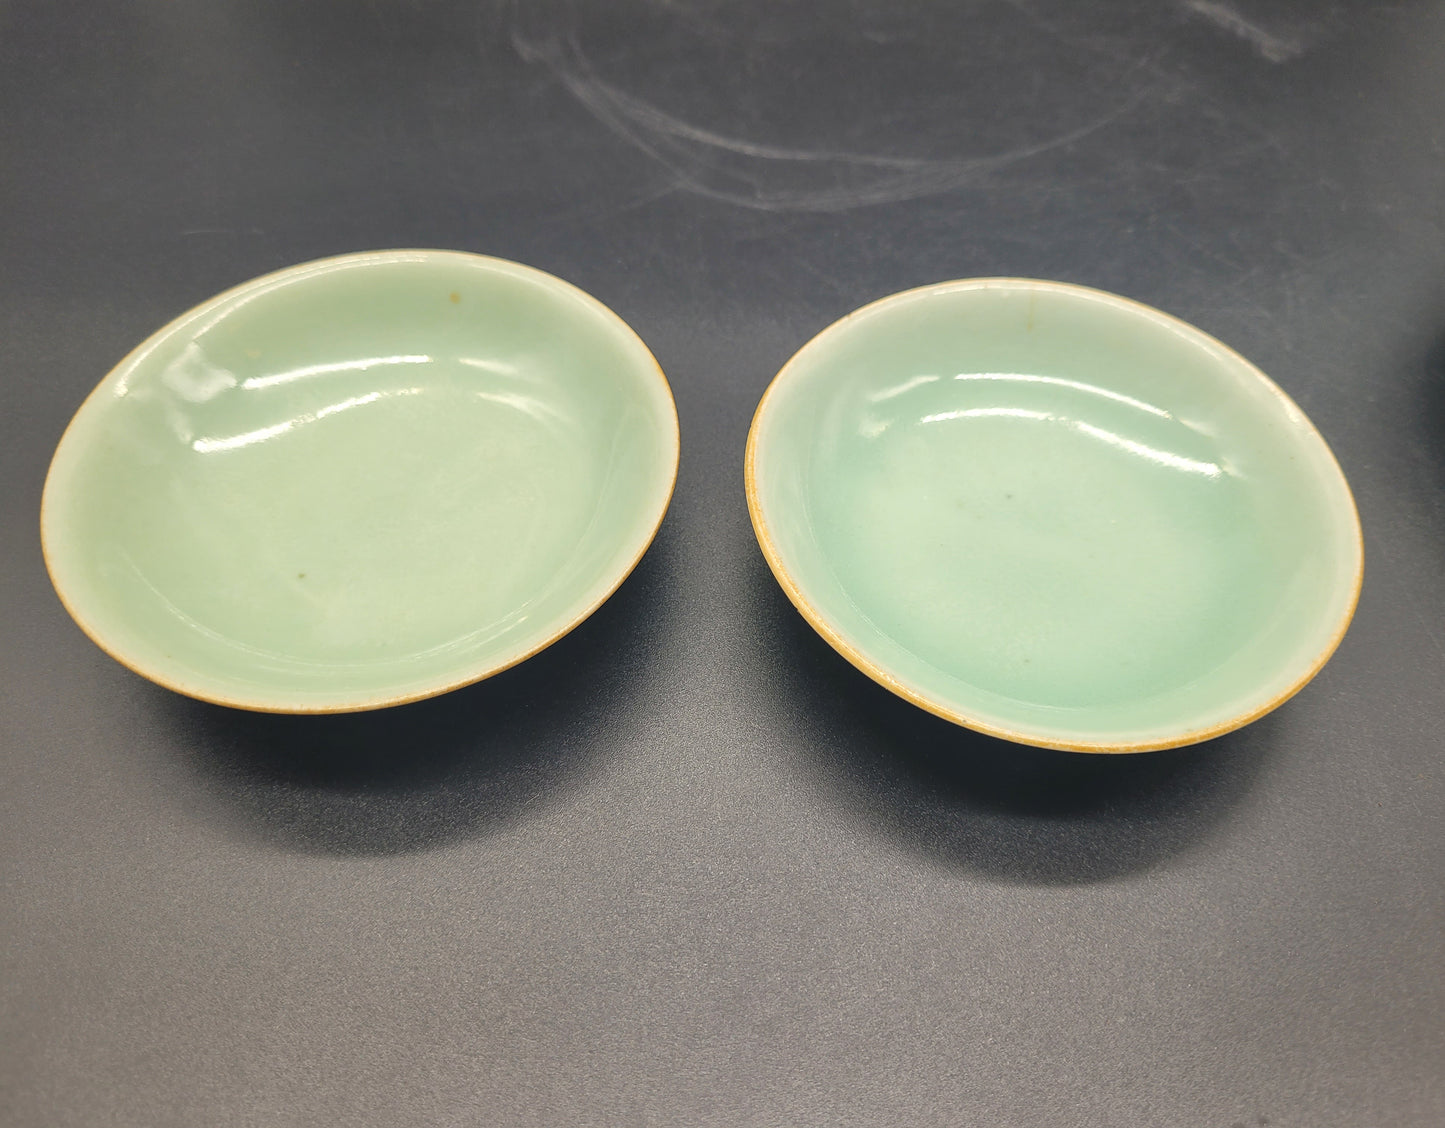 KB ANTIQUES & JEWELLERY Antique Chinese Longquan Celadon Plates / Bowls Antiques & collectables USA